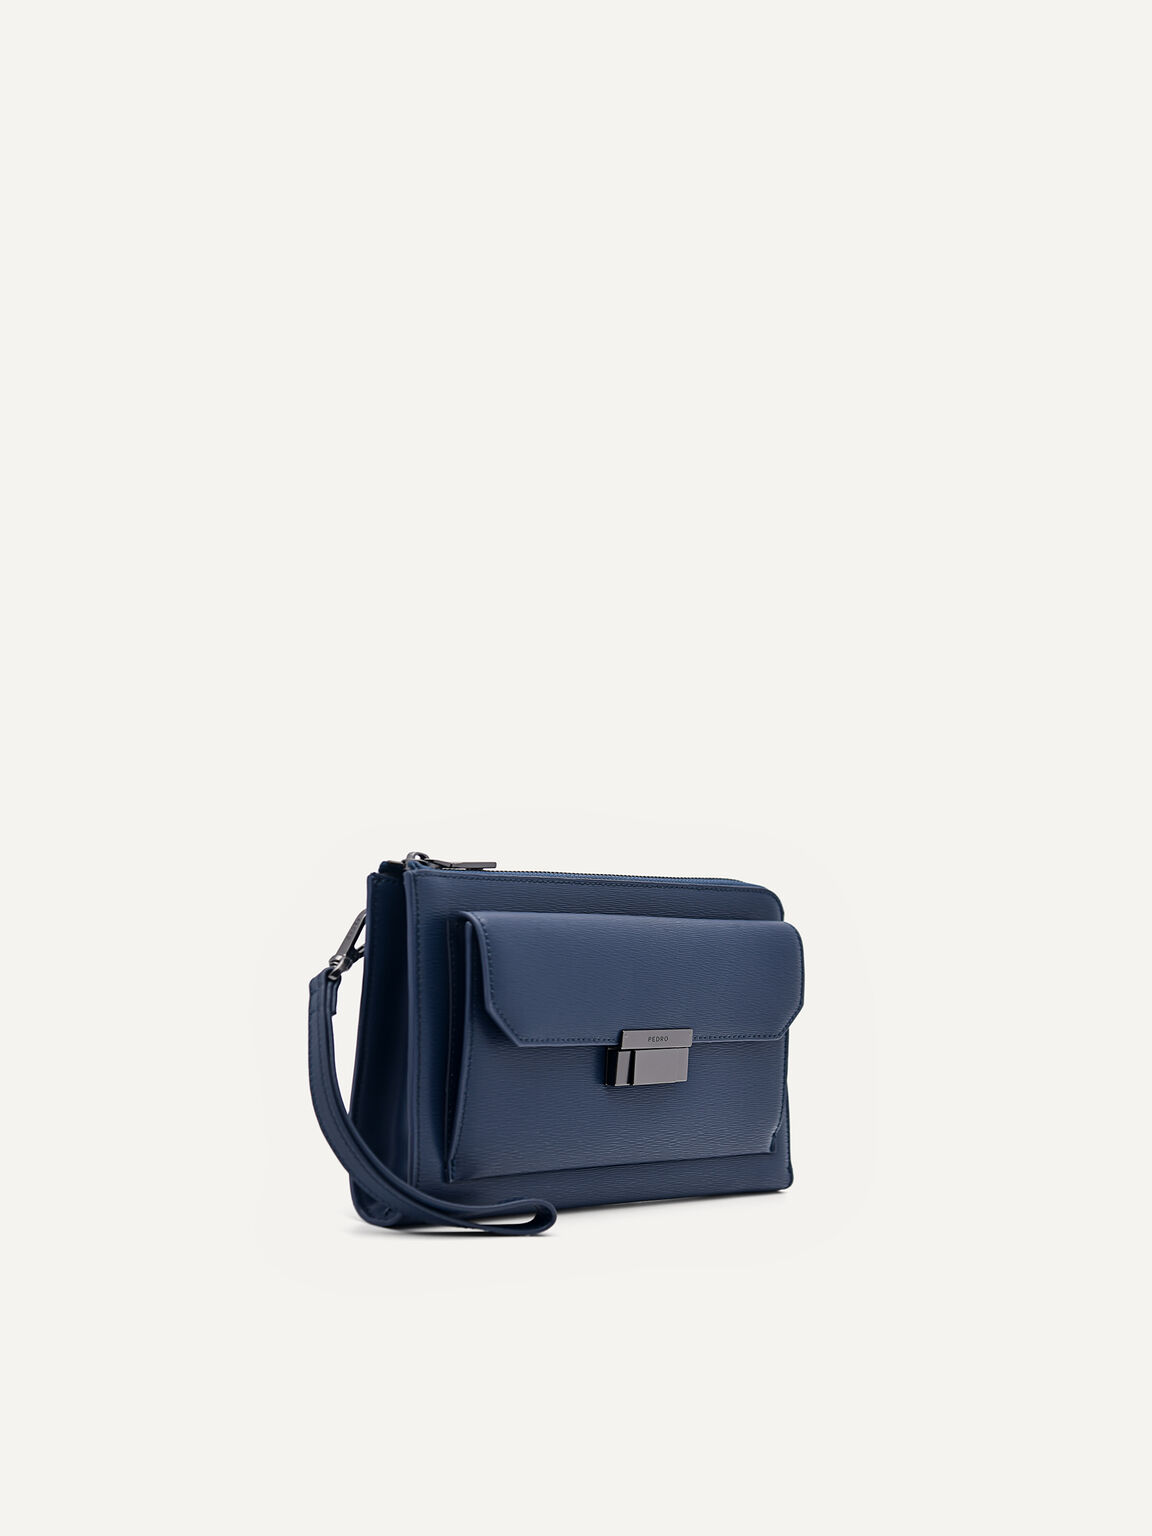 Henry Small Leather Clutch Bag, Navy